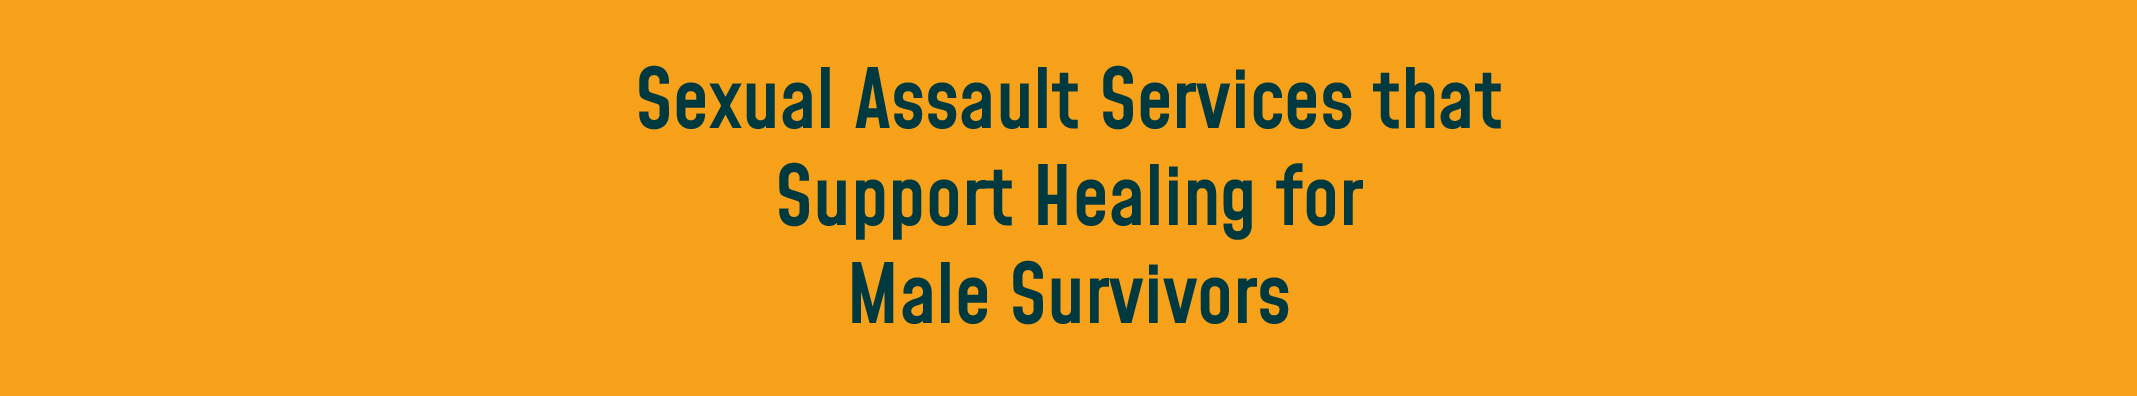 Sexual Assault Services that Support Healing for Male Survivors